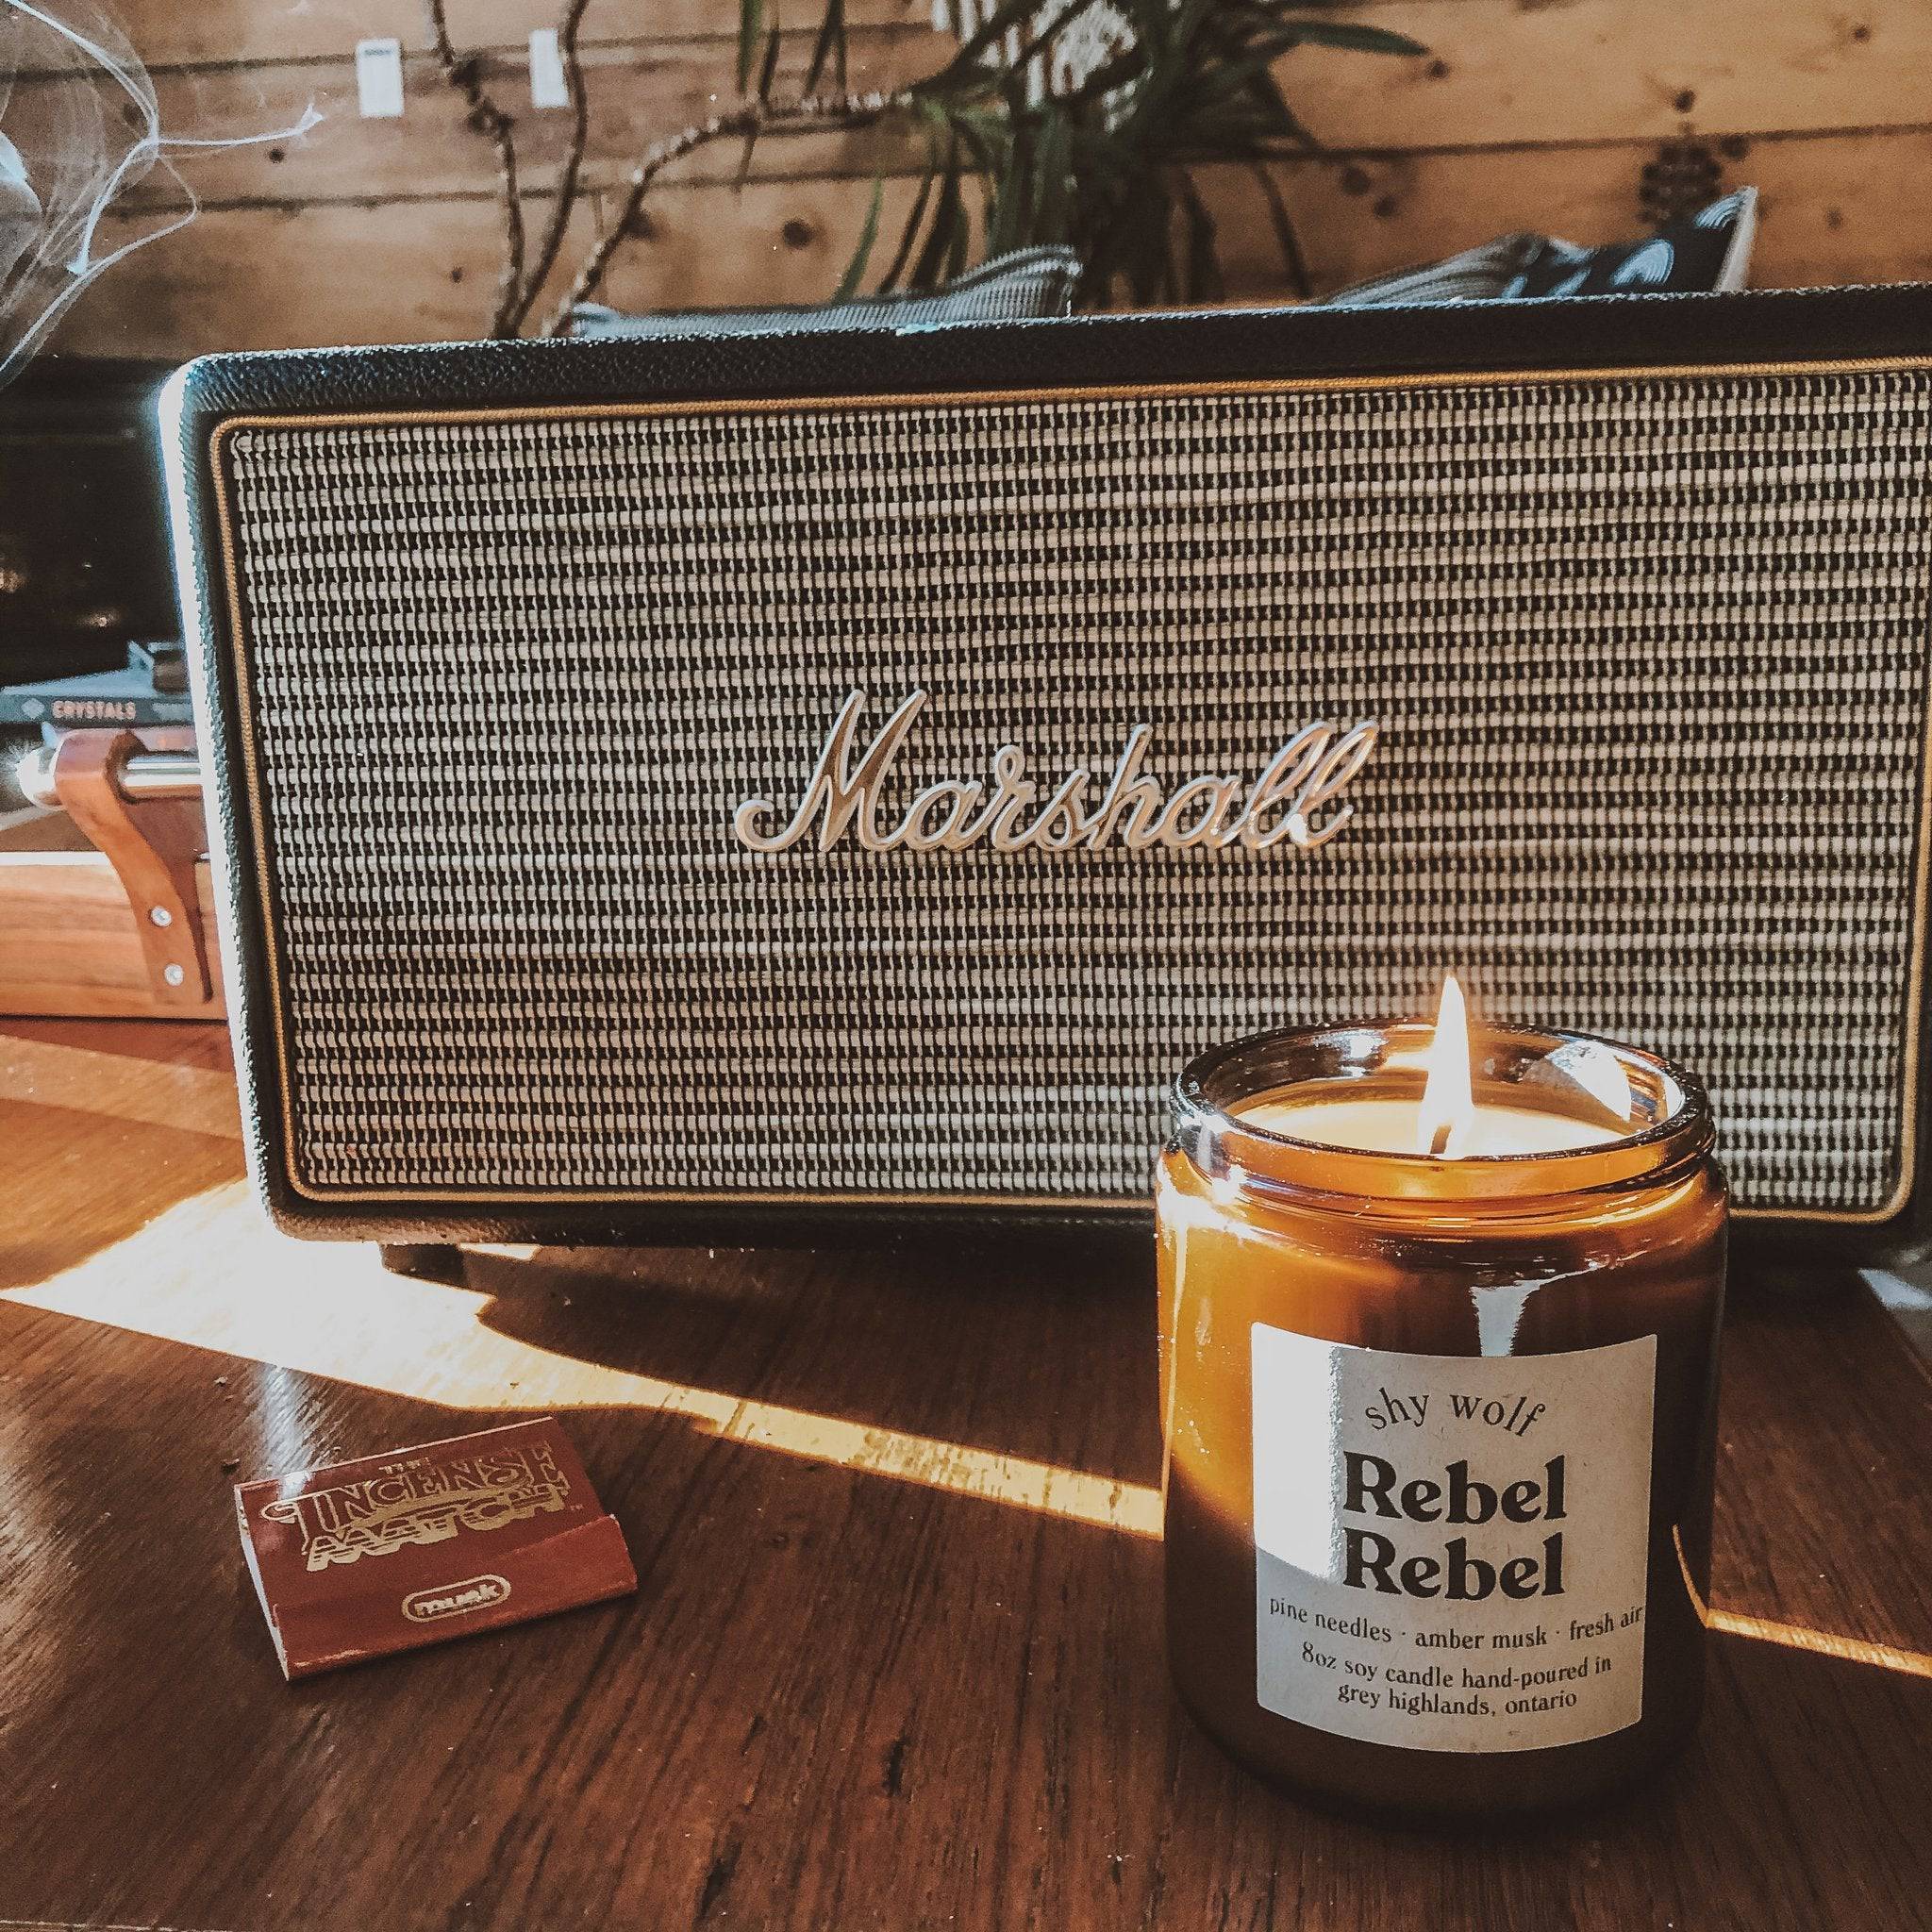 REBEL REBEL CANDLE - Out of the Blue